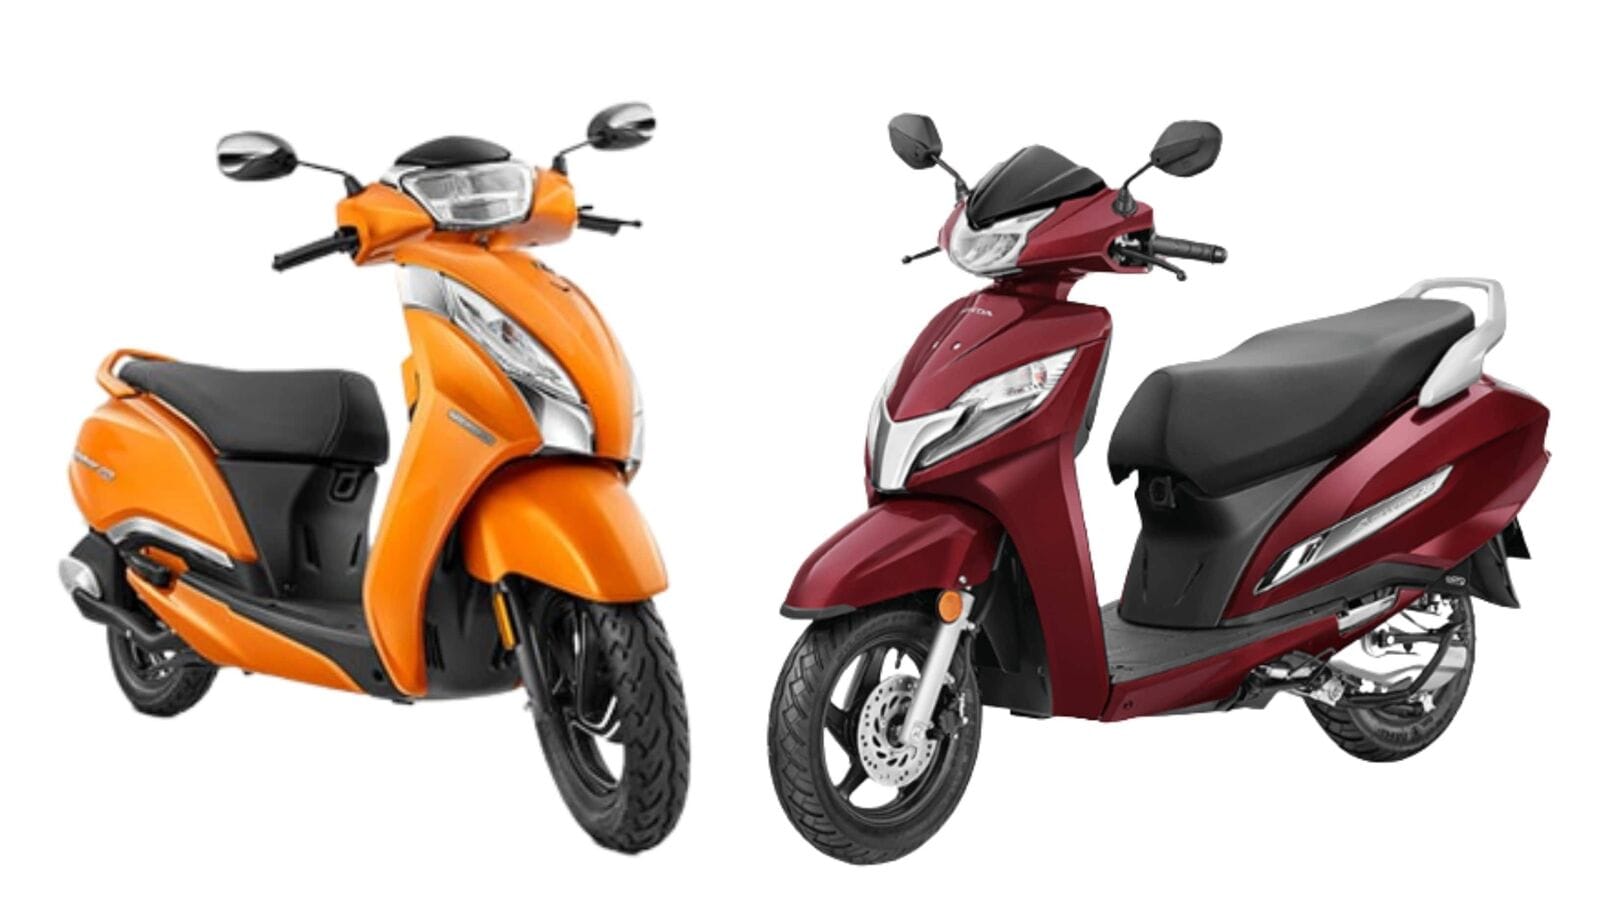 TVS outsells Honda in February 2023 two-wheeler sales | HT Auto